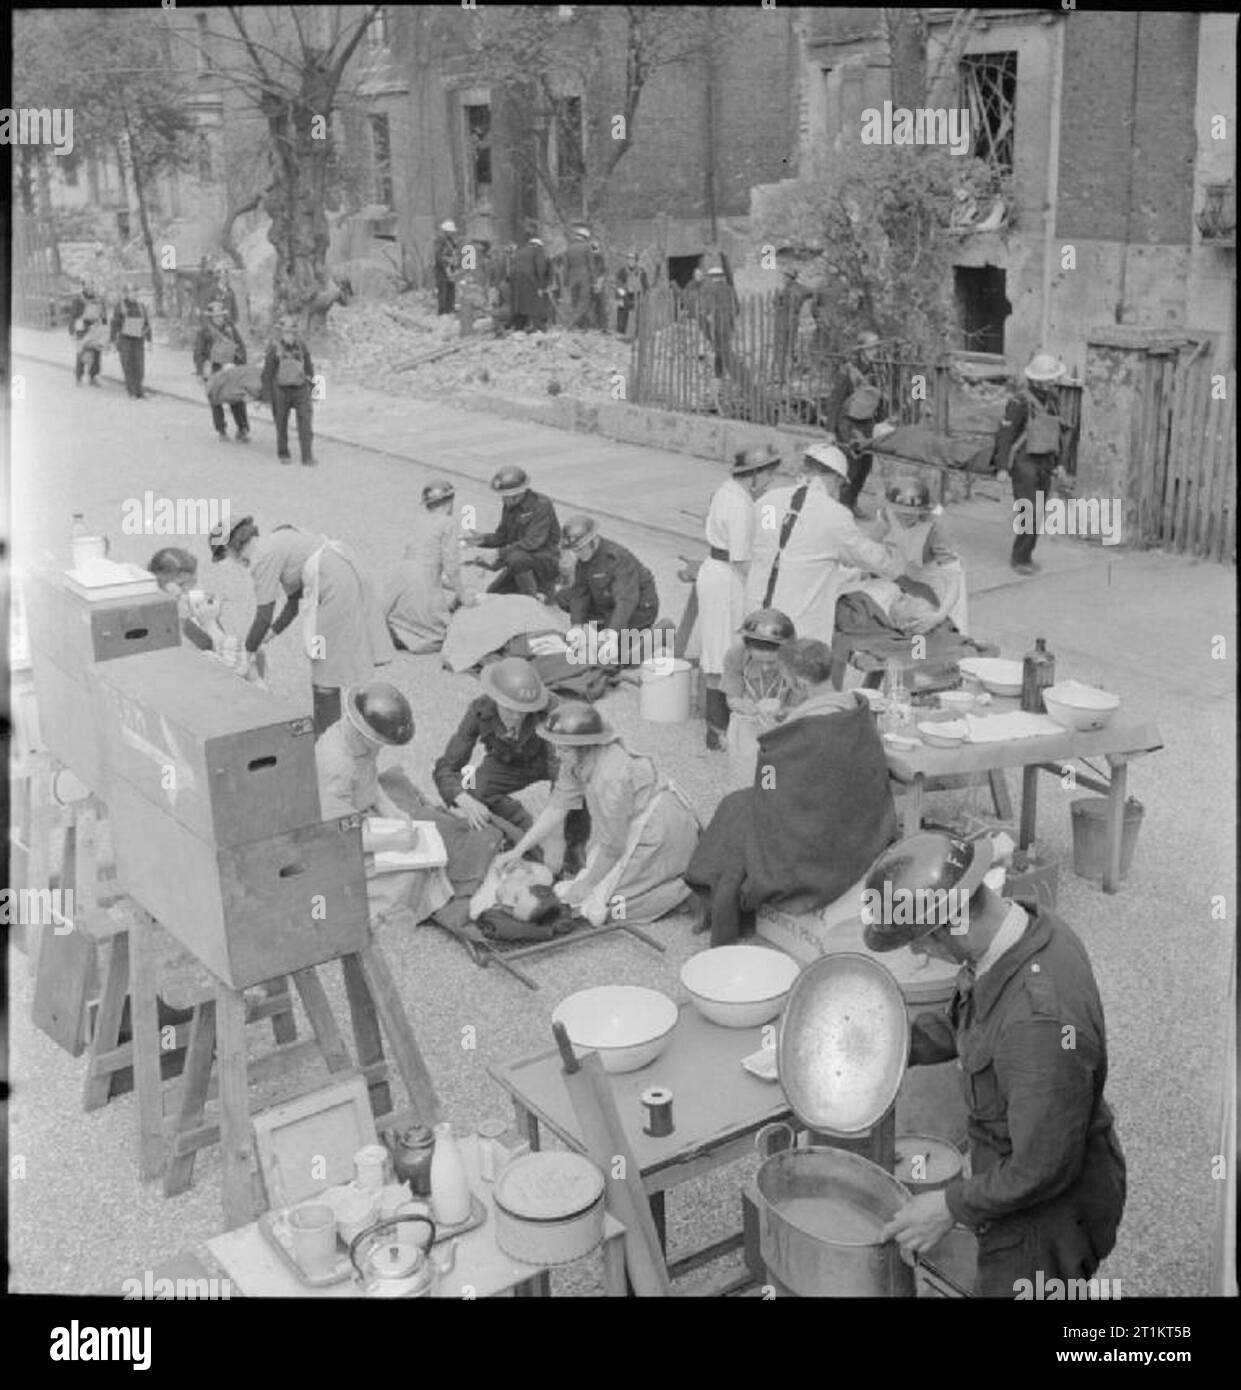 The Reconstruction of 'an Incident'- Civil Defence Training in Fulham, London, 1942 A mobile medical unit has been set up at one end of the street in order to grade and treat casualties as they are brought from the incident. Behind them, more rescue work is being carried out by Civil Defence workers and two stretcher bearers can just be seen bringing another casualty to the medical unit. This photograph was taken on Edith Villas, looking from the West Cromwell Road end, towards Edith Road. West Kensington Court (not visible) is on the left. Stock Photo